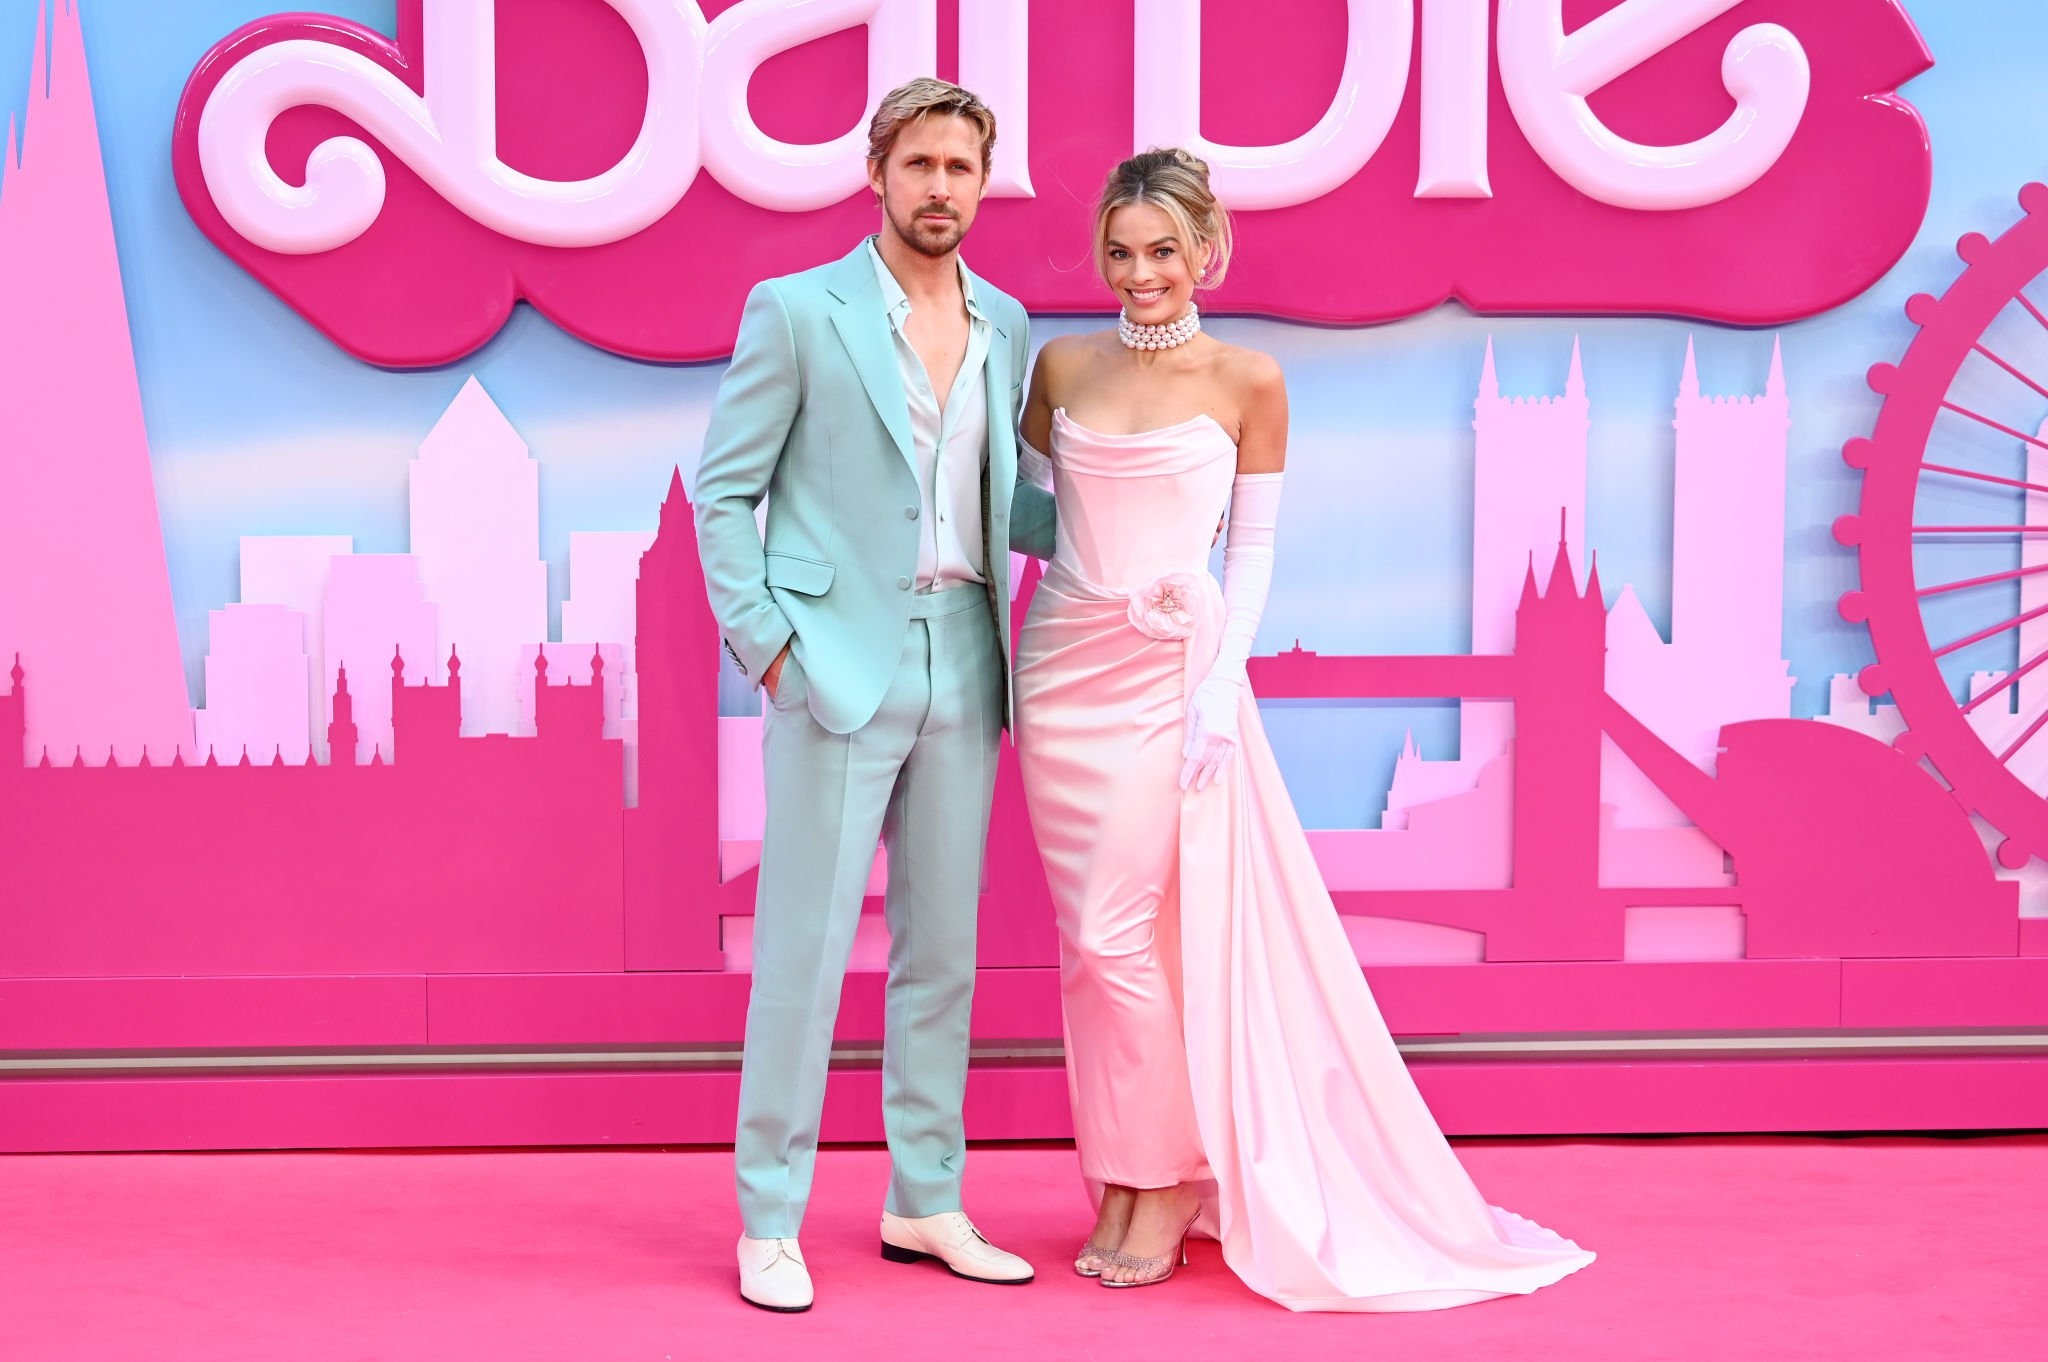 Margot Robbie and Ryan Gosling at the "Barbie" London Premiere on July 12, 2023 in London, England.